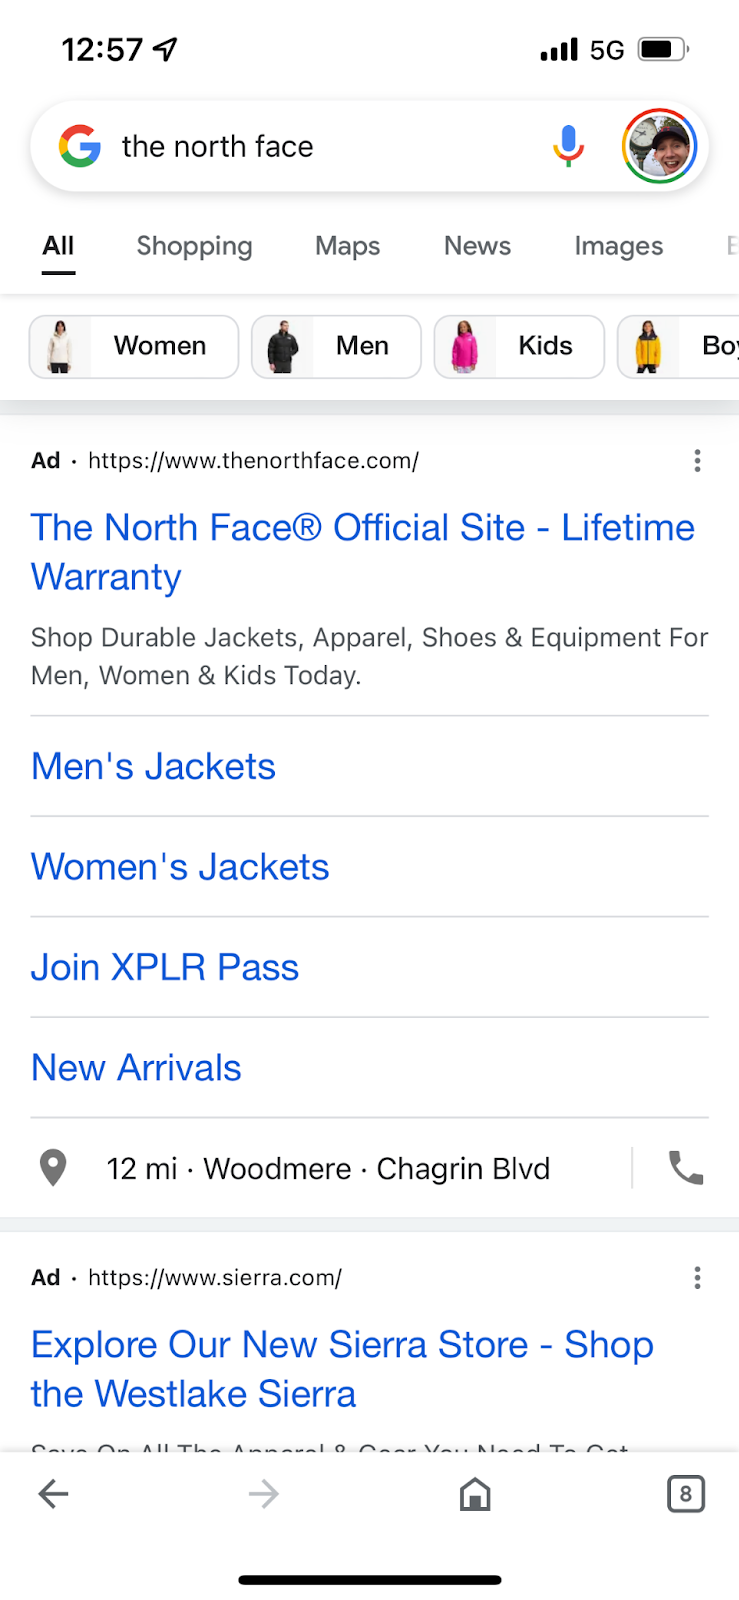 4 things to learn about paid search from The North Face